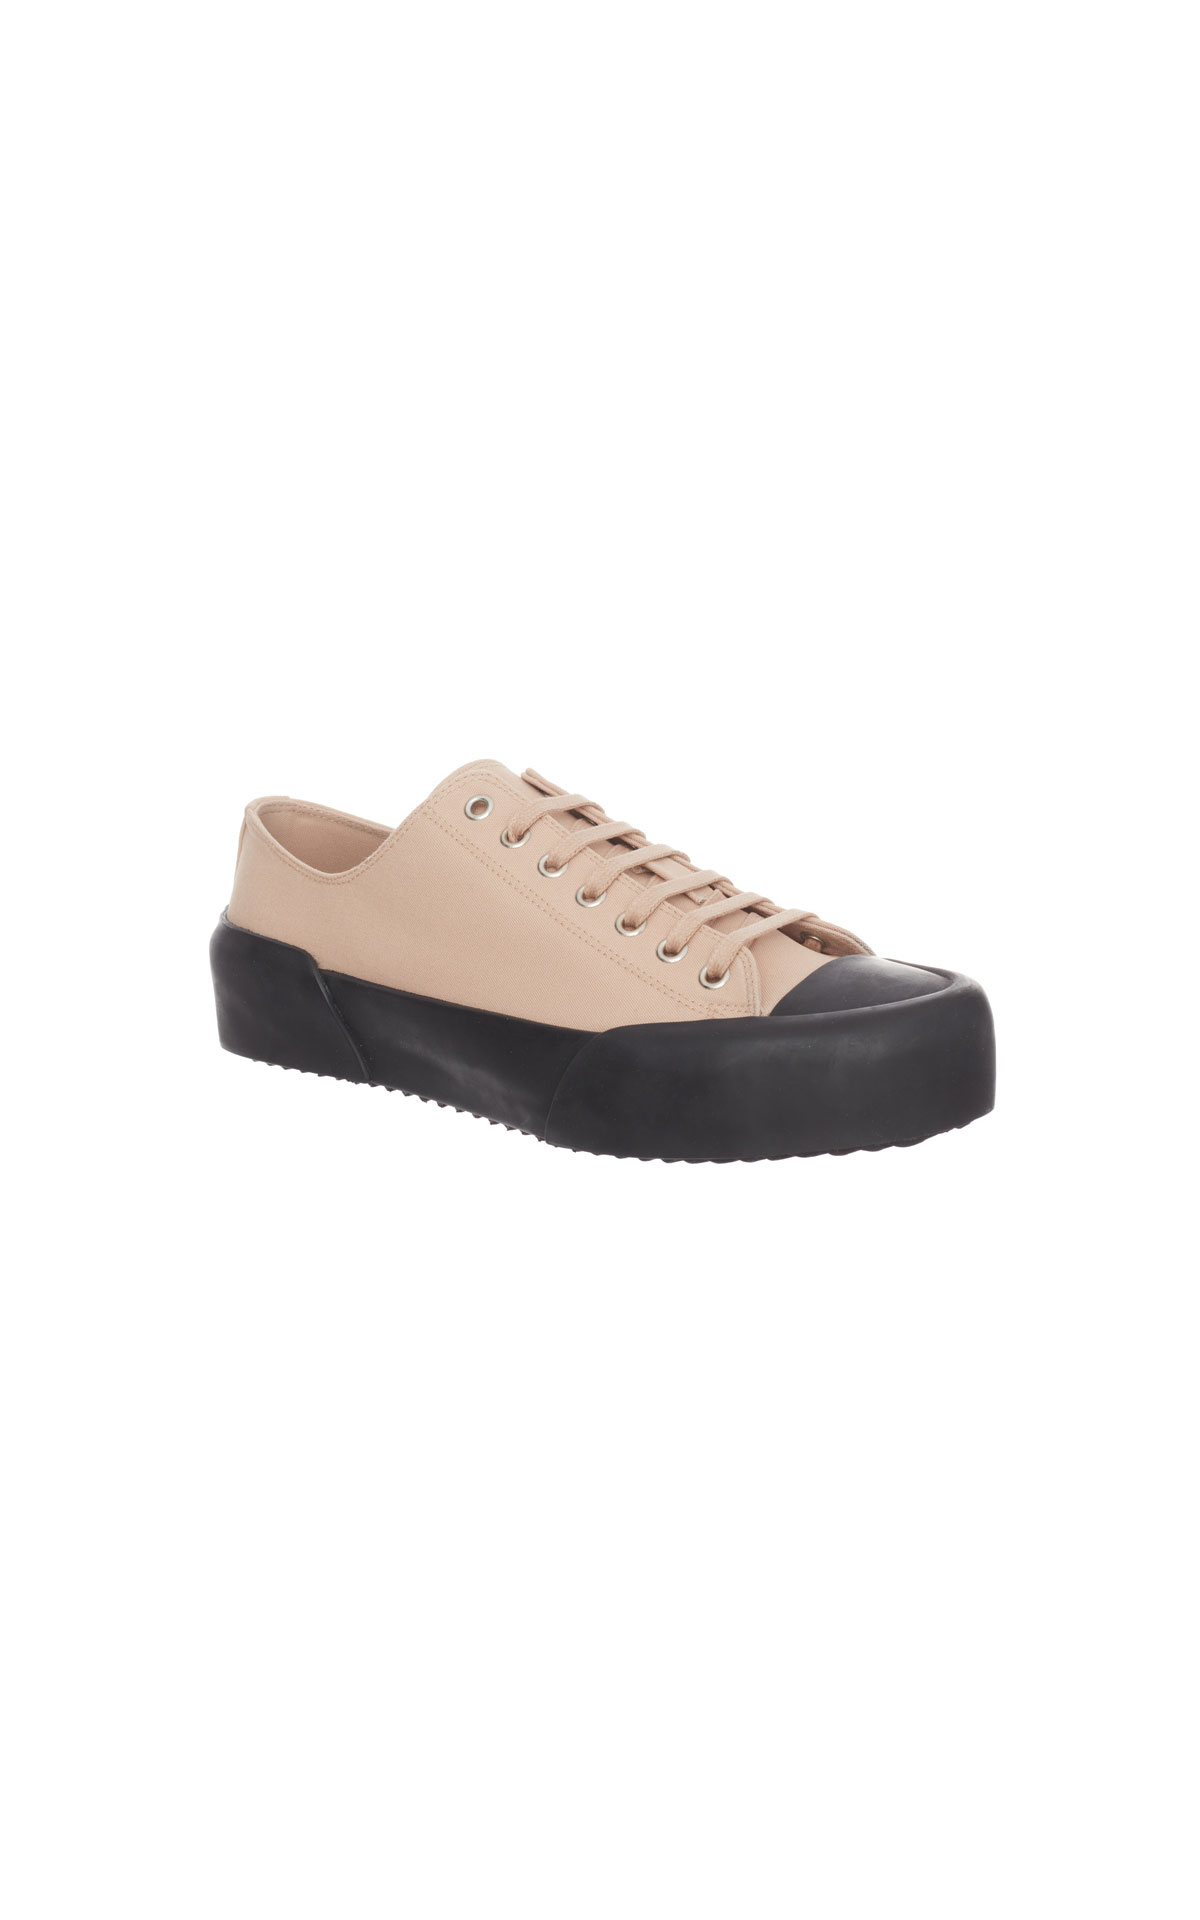 Jil Sander Biscuit sole sneakers from Bicester Village